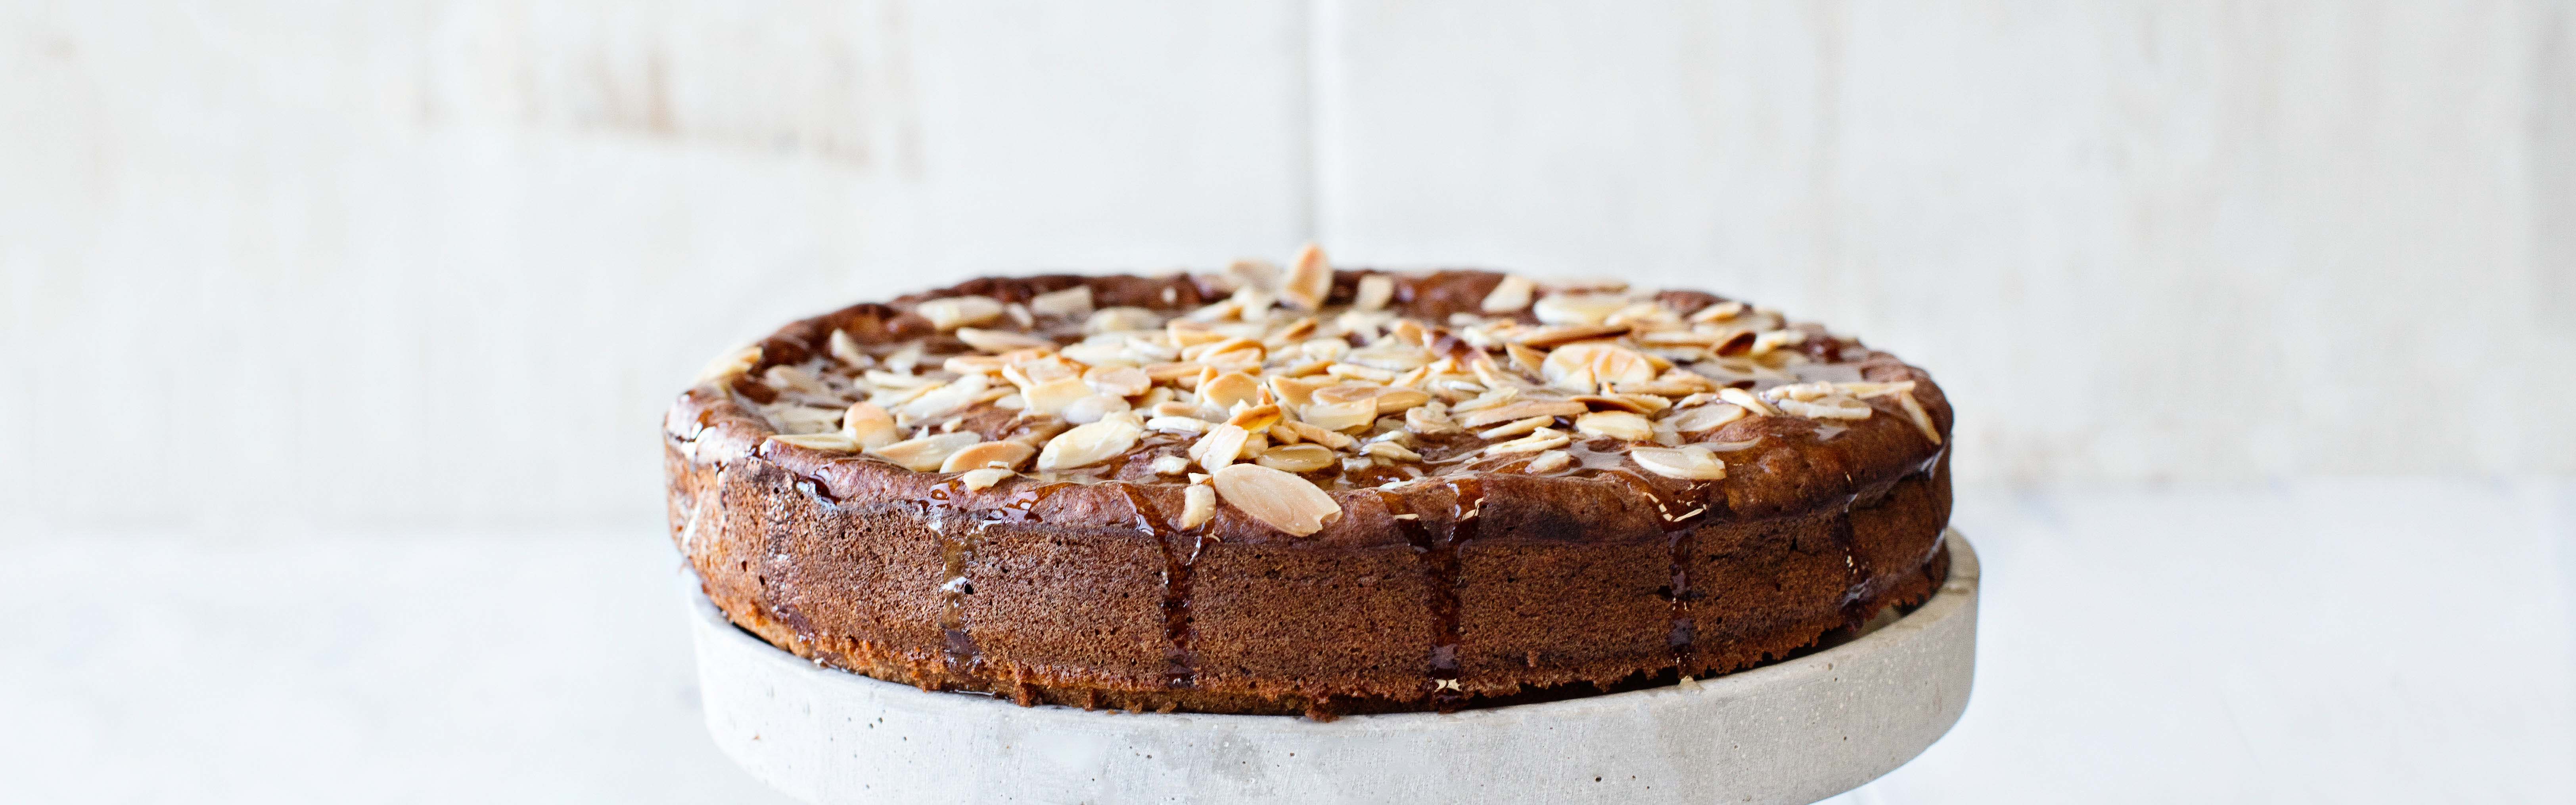 Almond cake made healthier with prunes